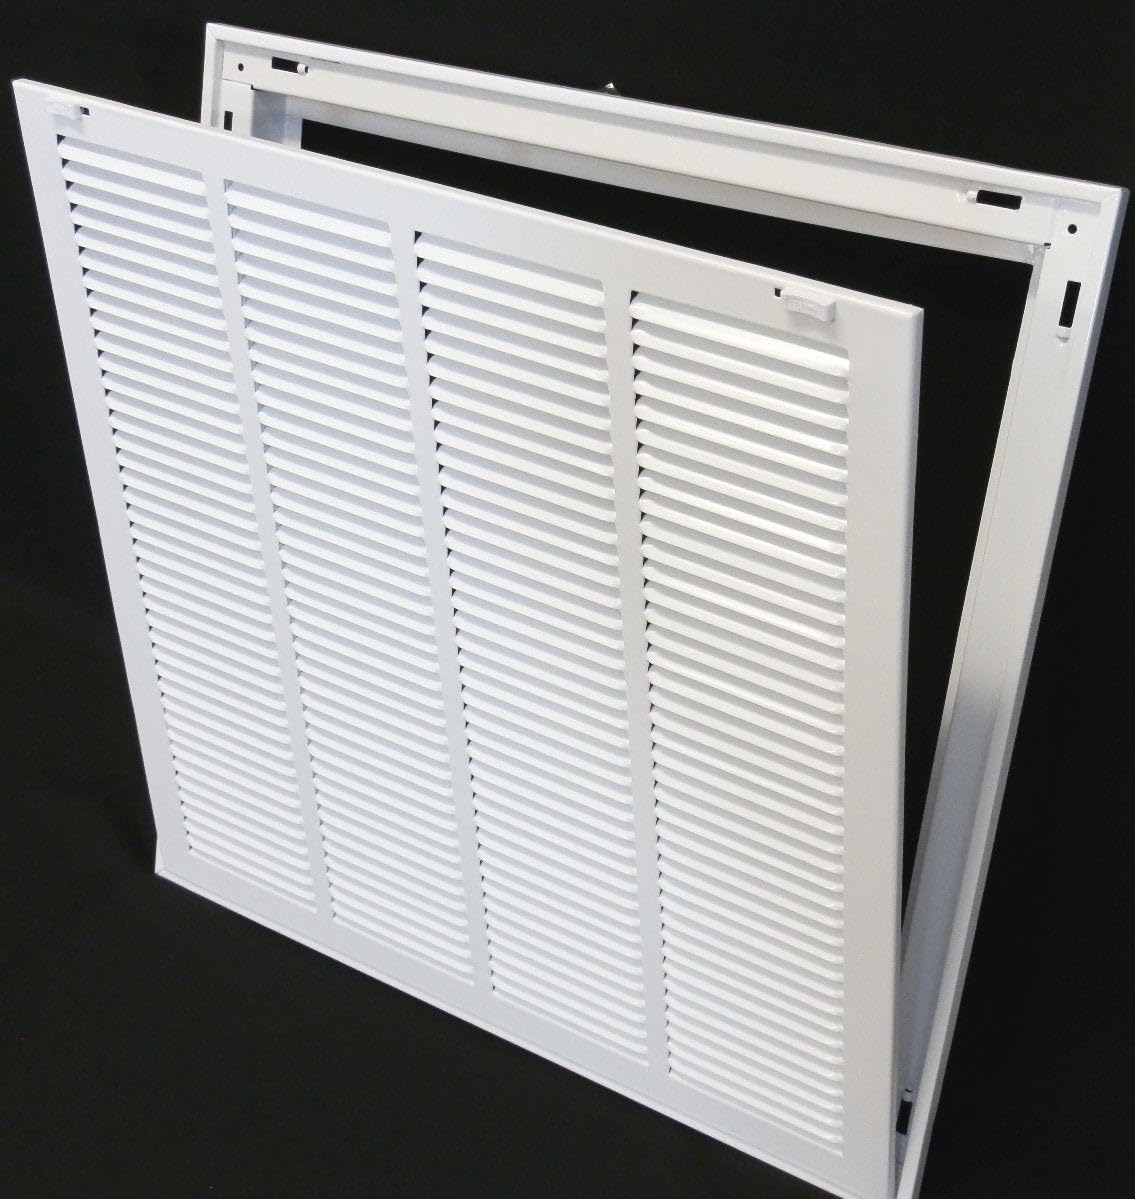 18&quot; X 36&quot; Steel Return Air Filter Grille for 1&quot; Filter - Removable Frame - [Outer Dimensions: 20 5/8&quot; X 38 5/8&quot;]